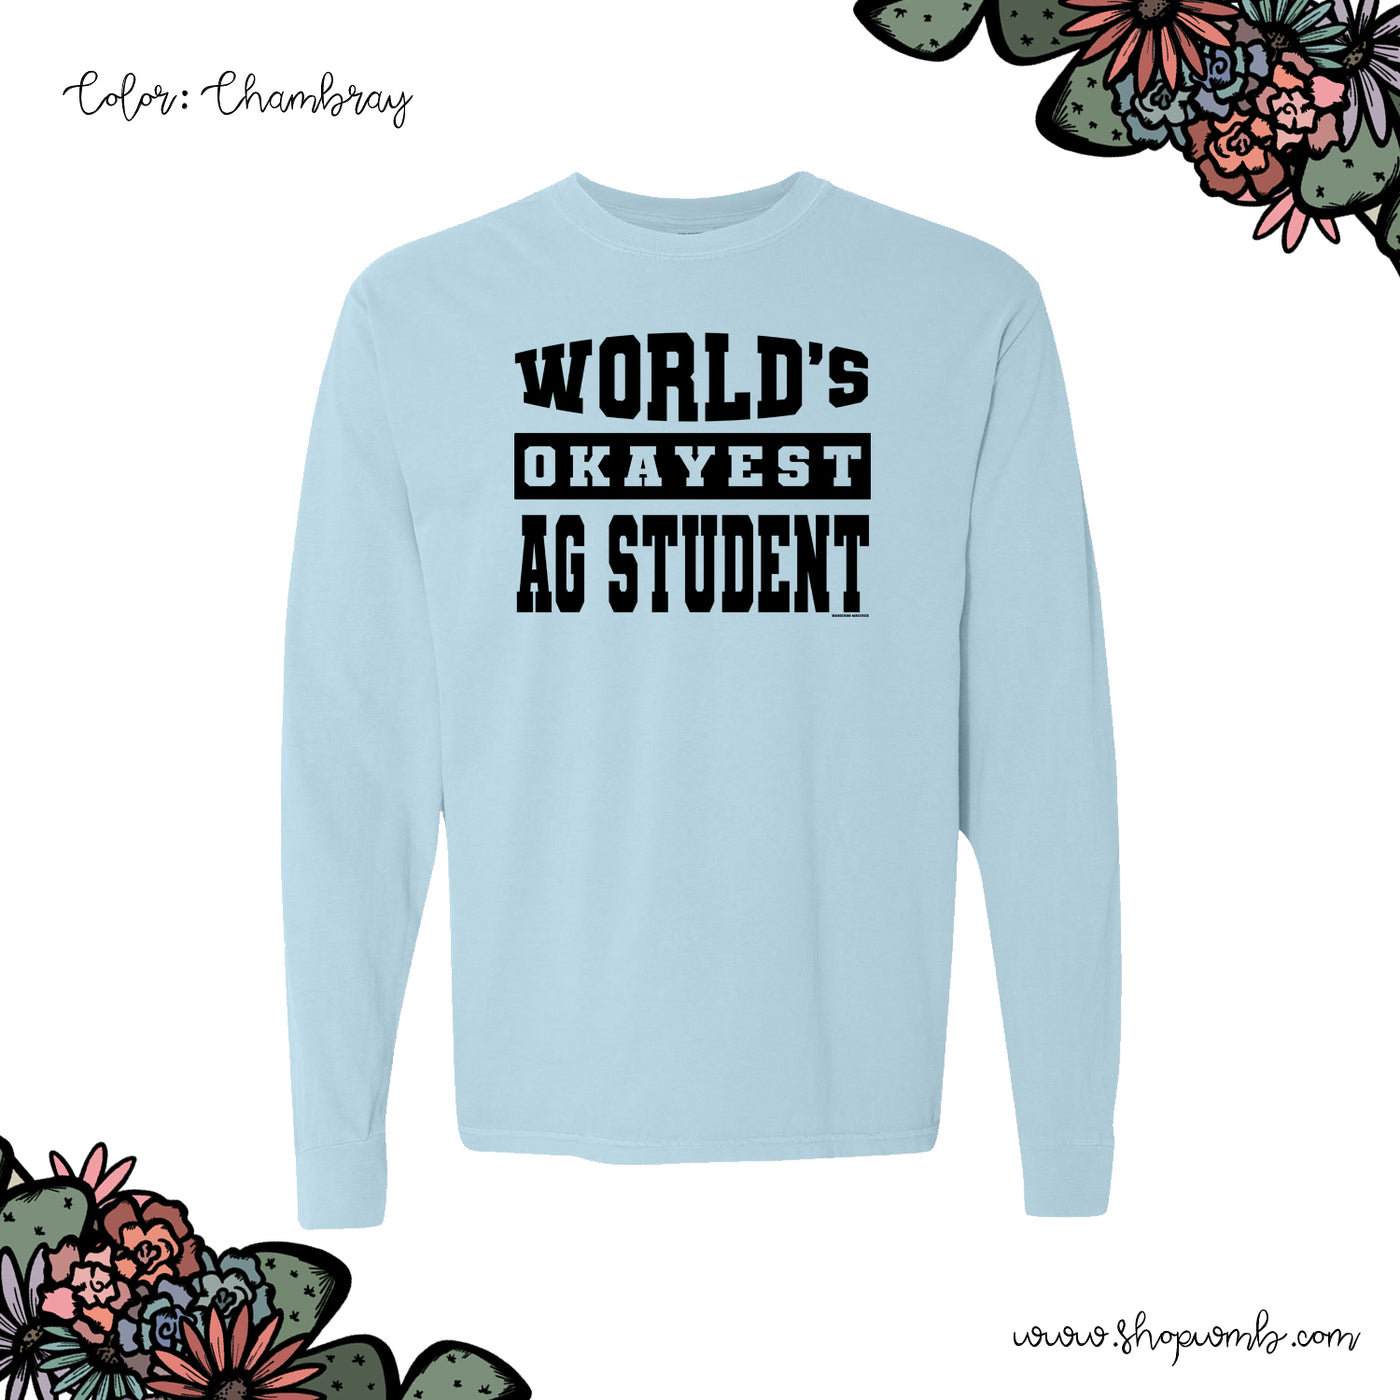 Worlds Okayest Ag Student LONG SLEEVE T-Shirt (S-3XL) - Multiple Colors!